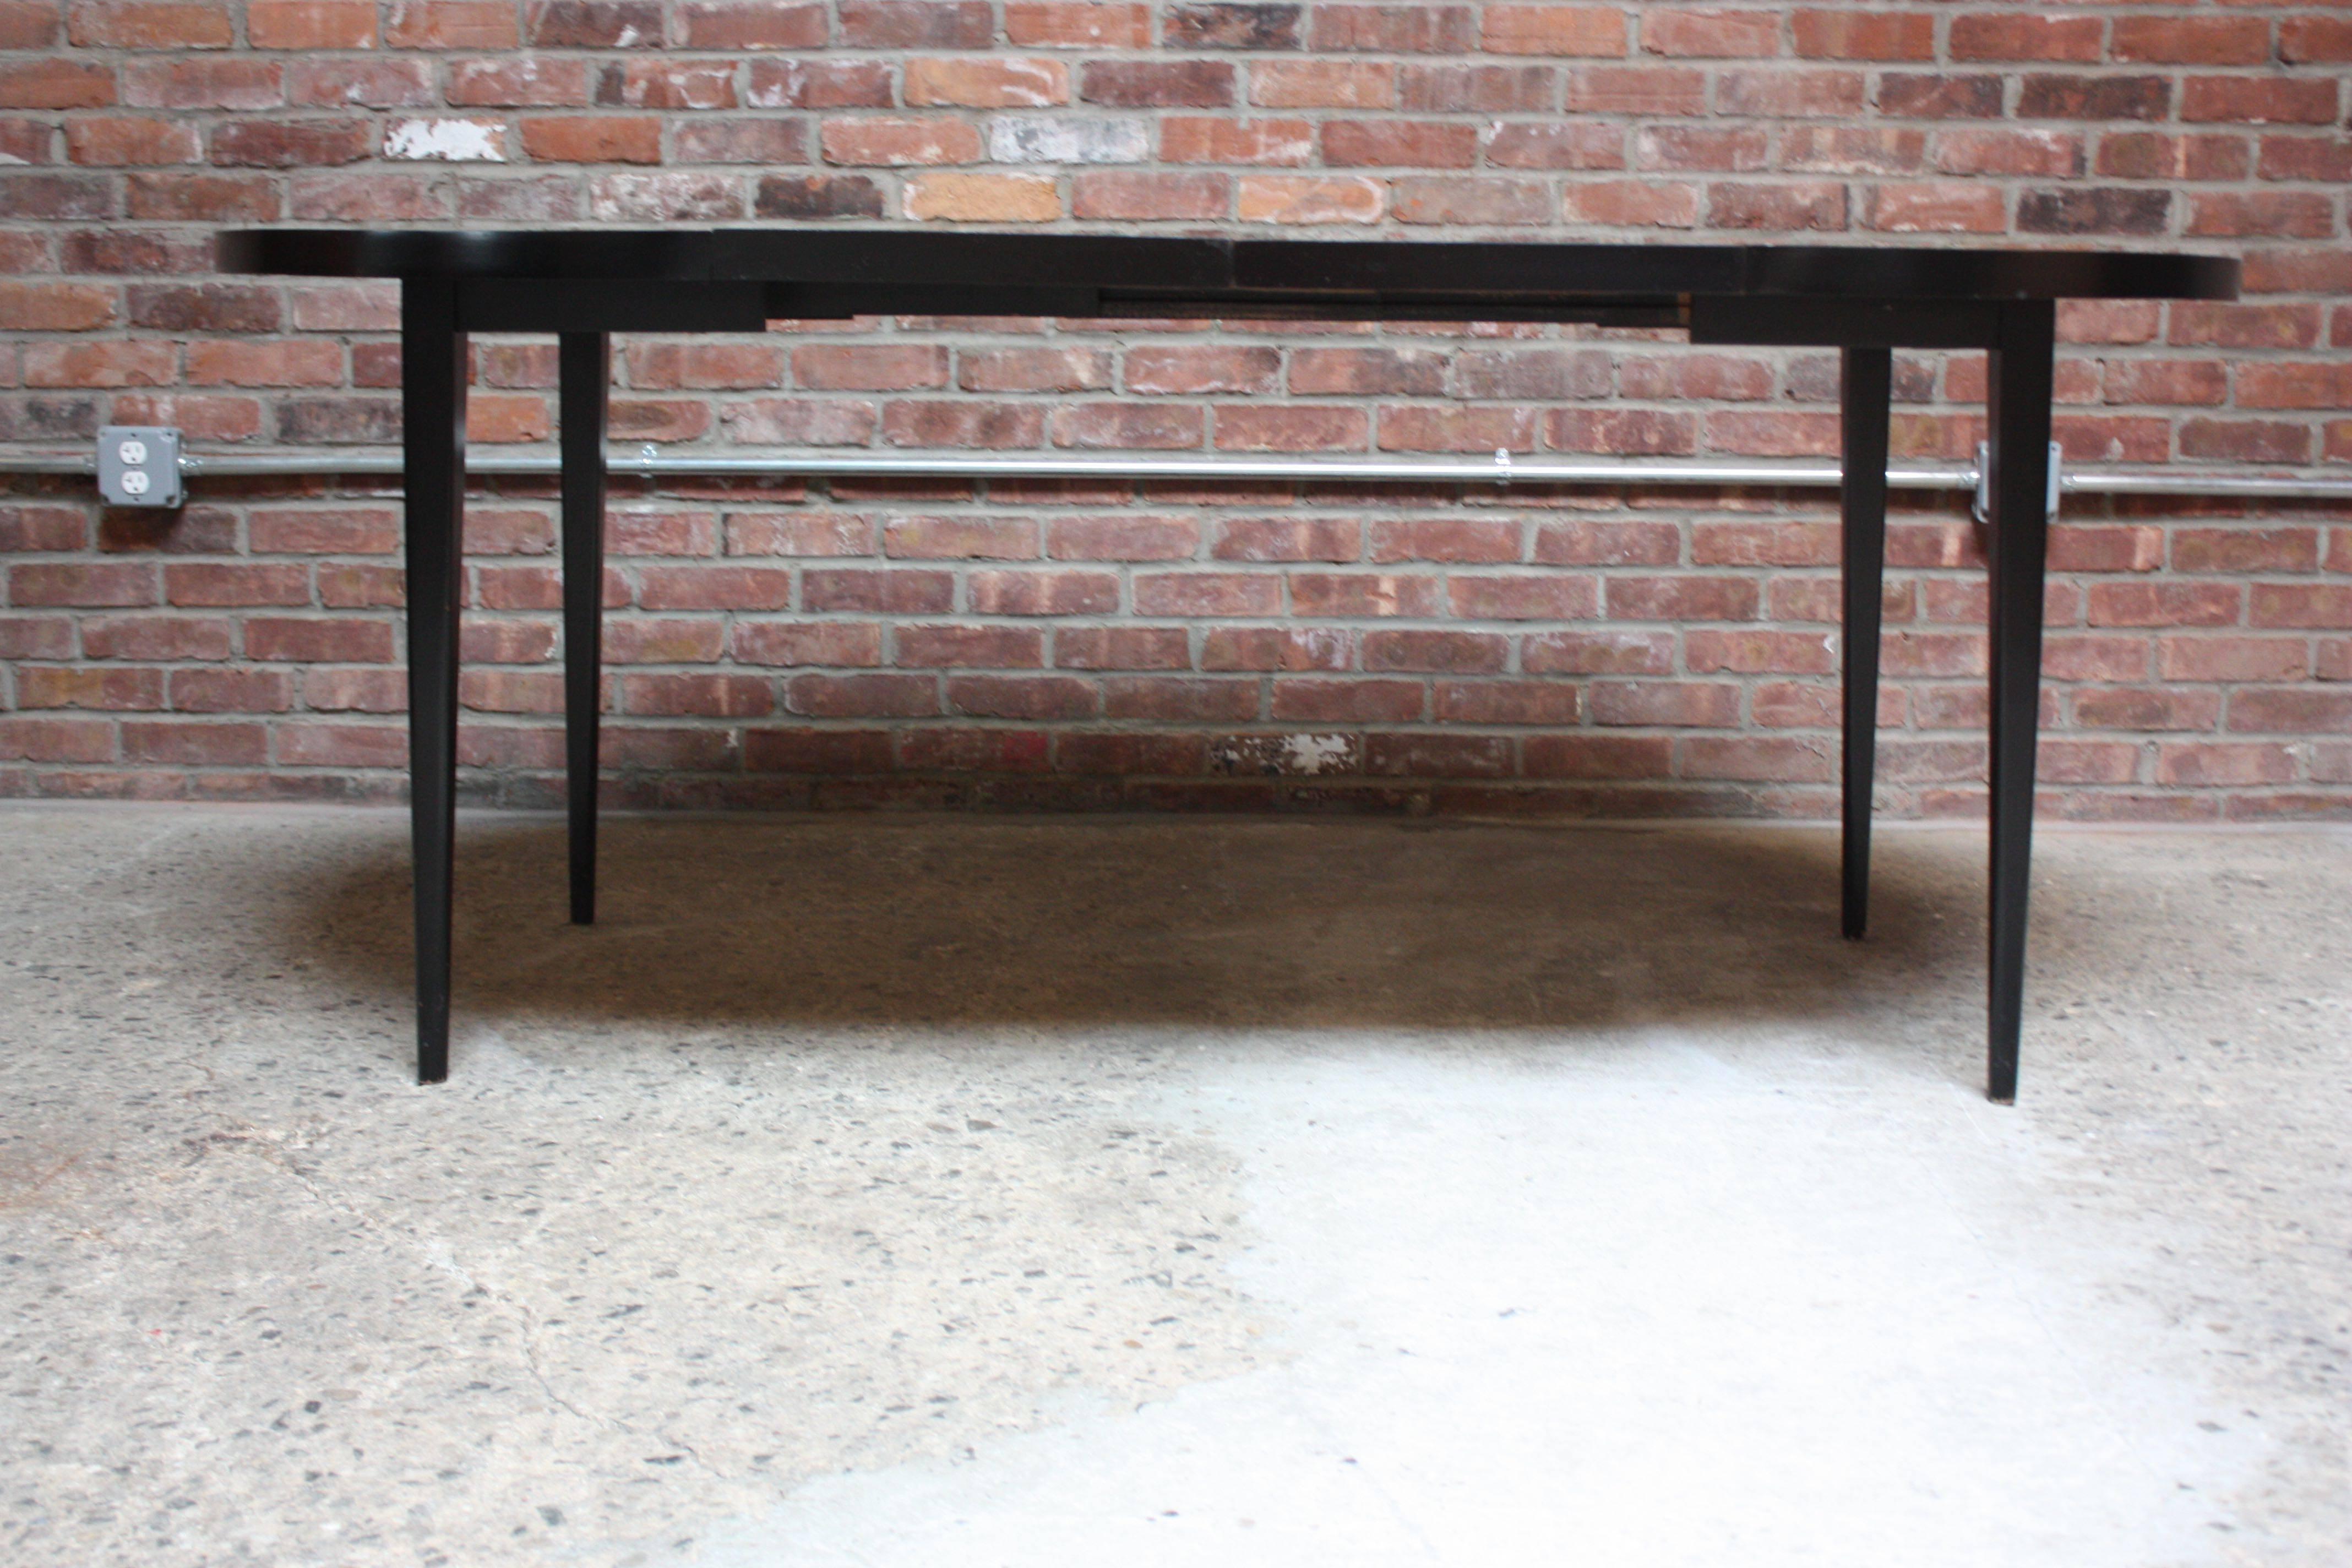 Paul Mccobb designed this ebonized maple dining table for the Winchendon Furniture Company as part of his 'Planner Group' series in the 1950s. Comes with two 15.25